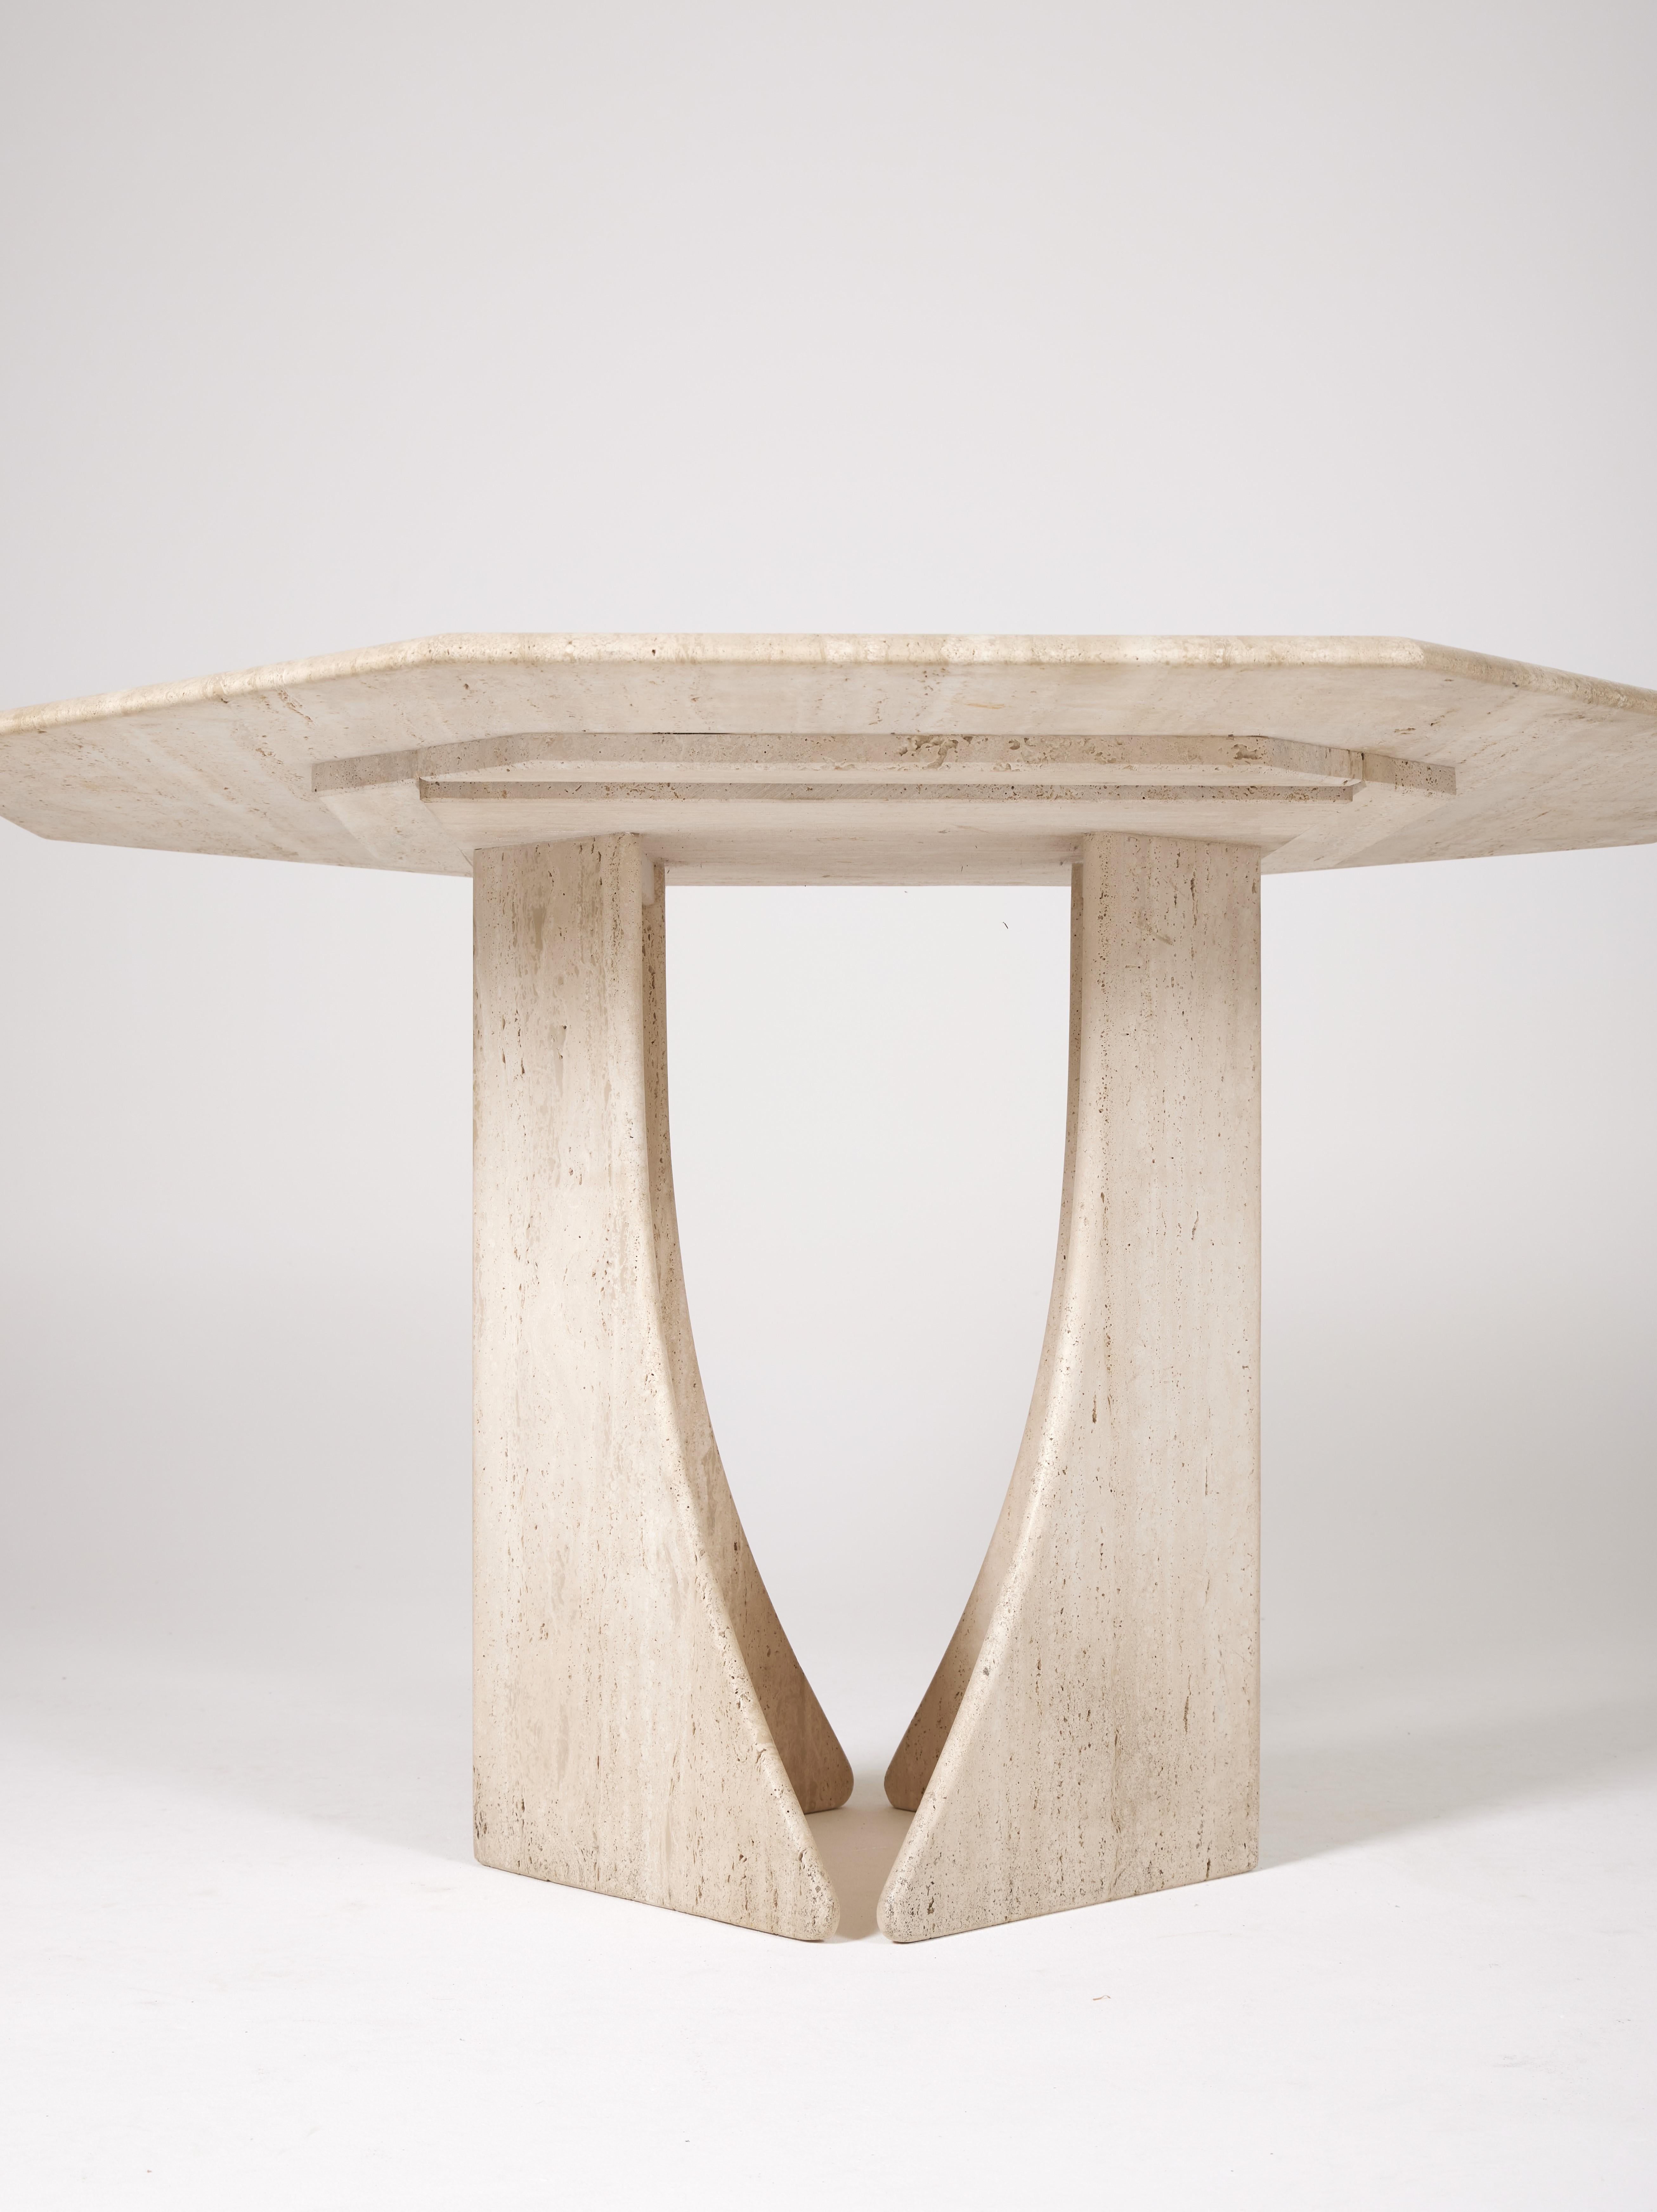 Travertine dining table, Italy 1970s. Octagonal top and curved hollow base. Very nice veining of the travertine, good condition.